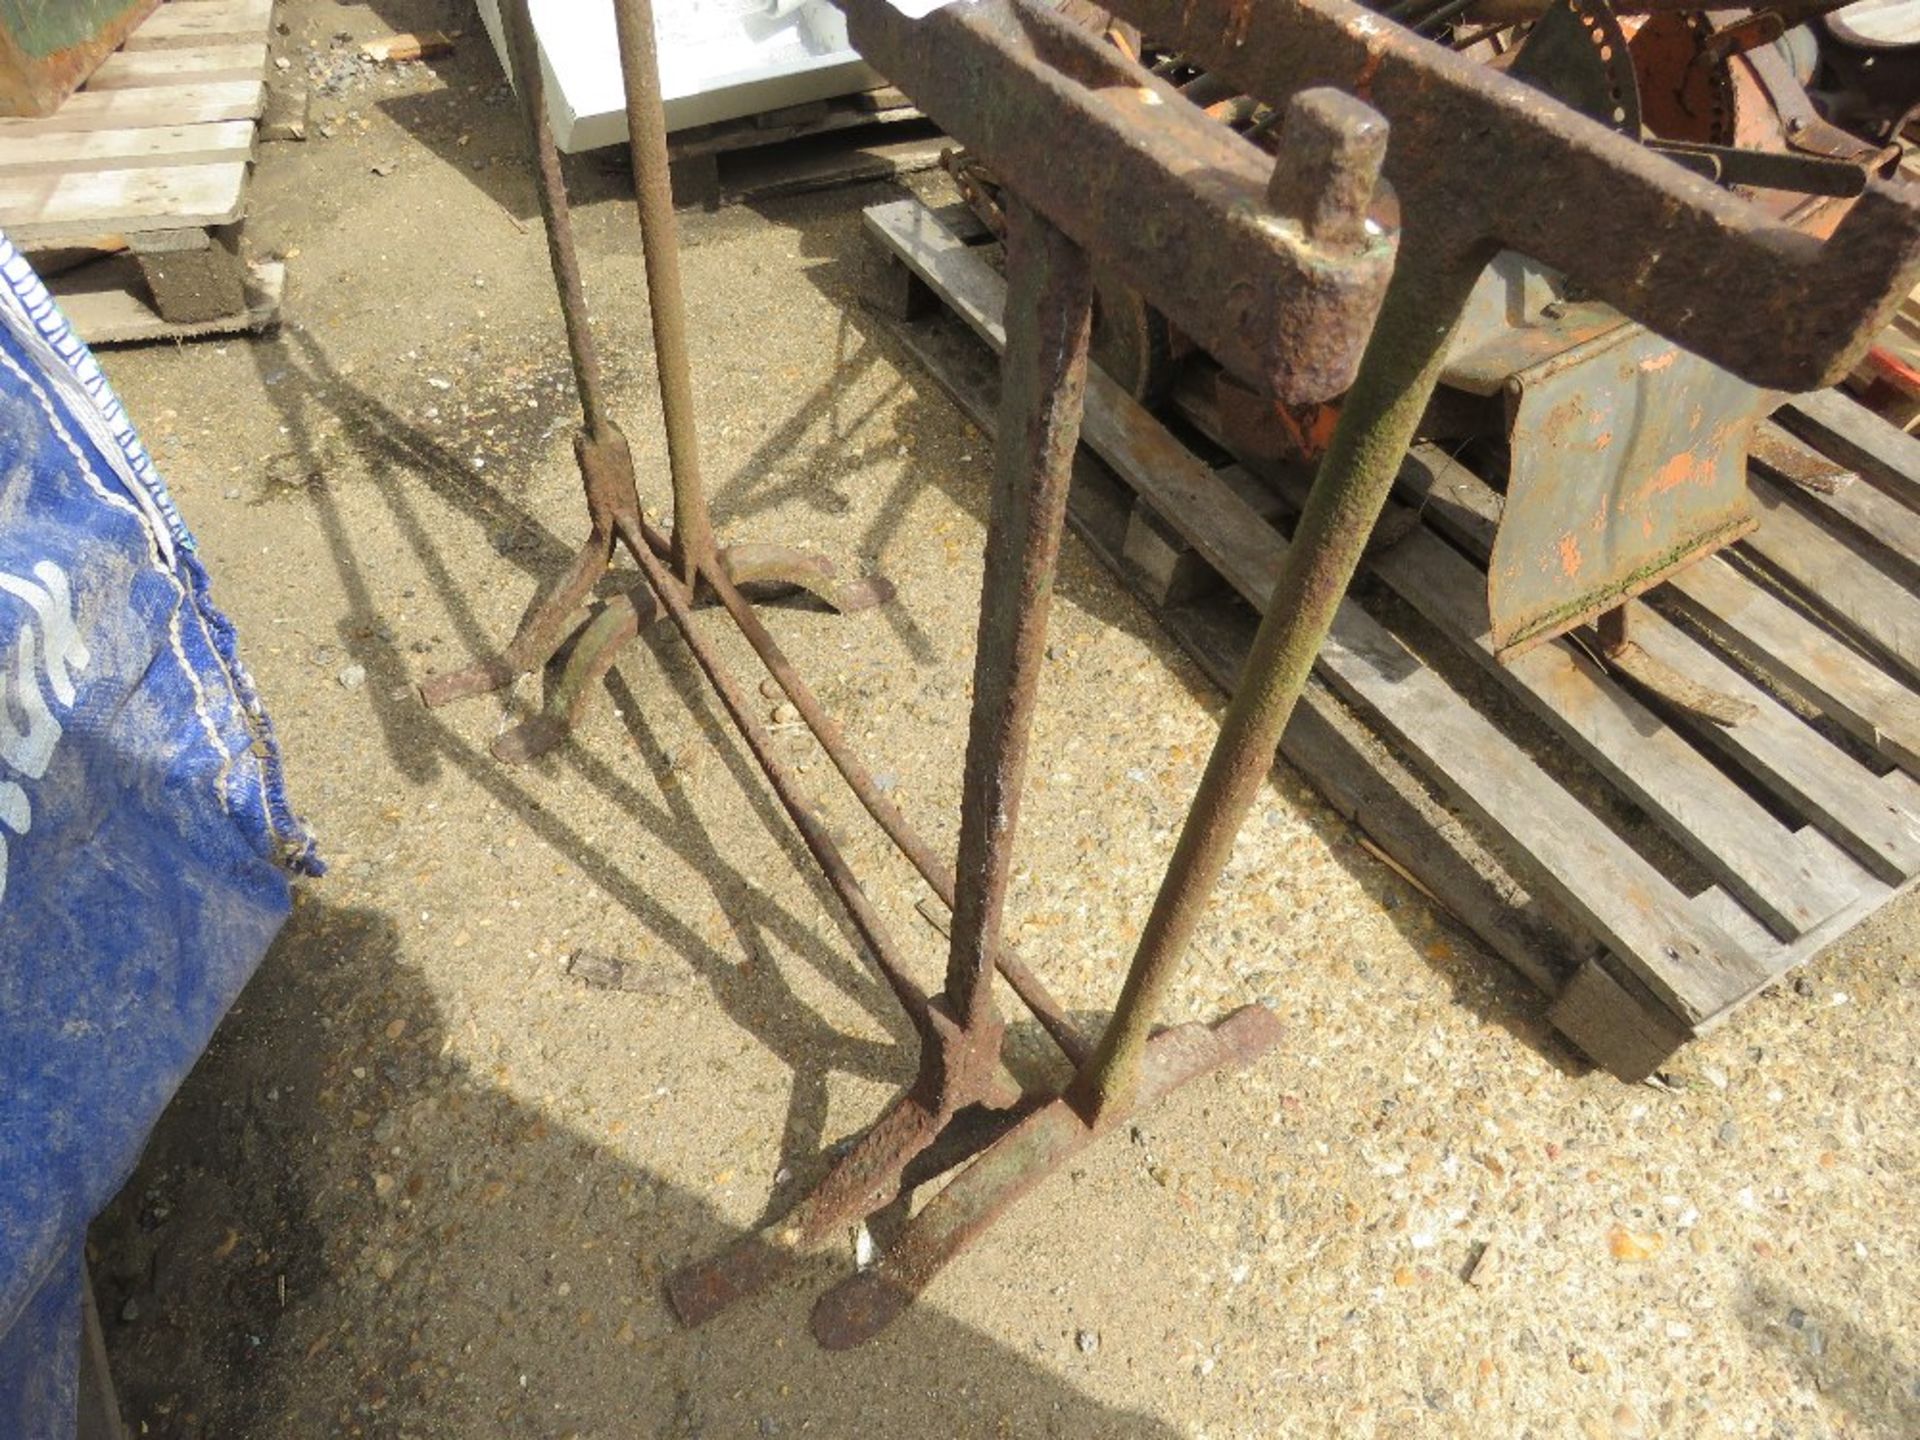 2 X WROUGHT IRON ANTIQUE TRESTLE STANDS. EXECUTOR SALE. THIS LOT IS SOLD UNDER THE AUCTIONEERS MA - Image 2 of 2